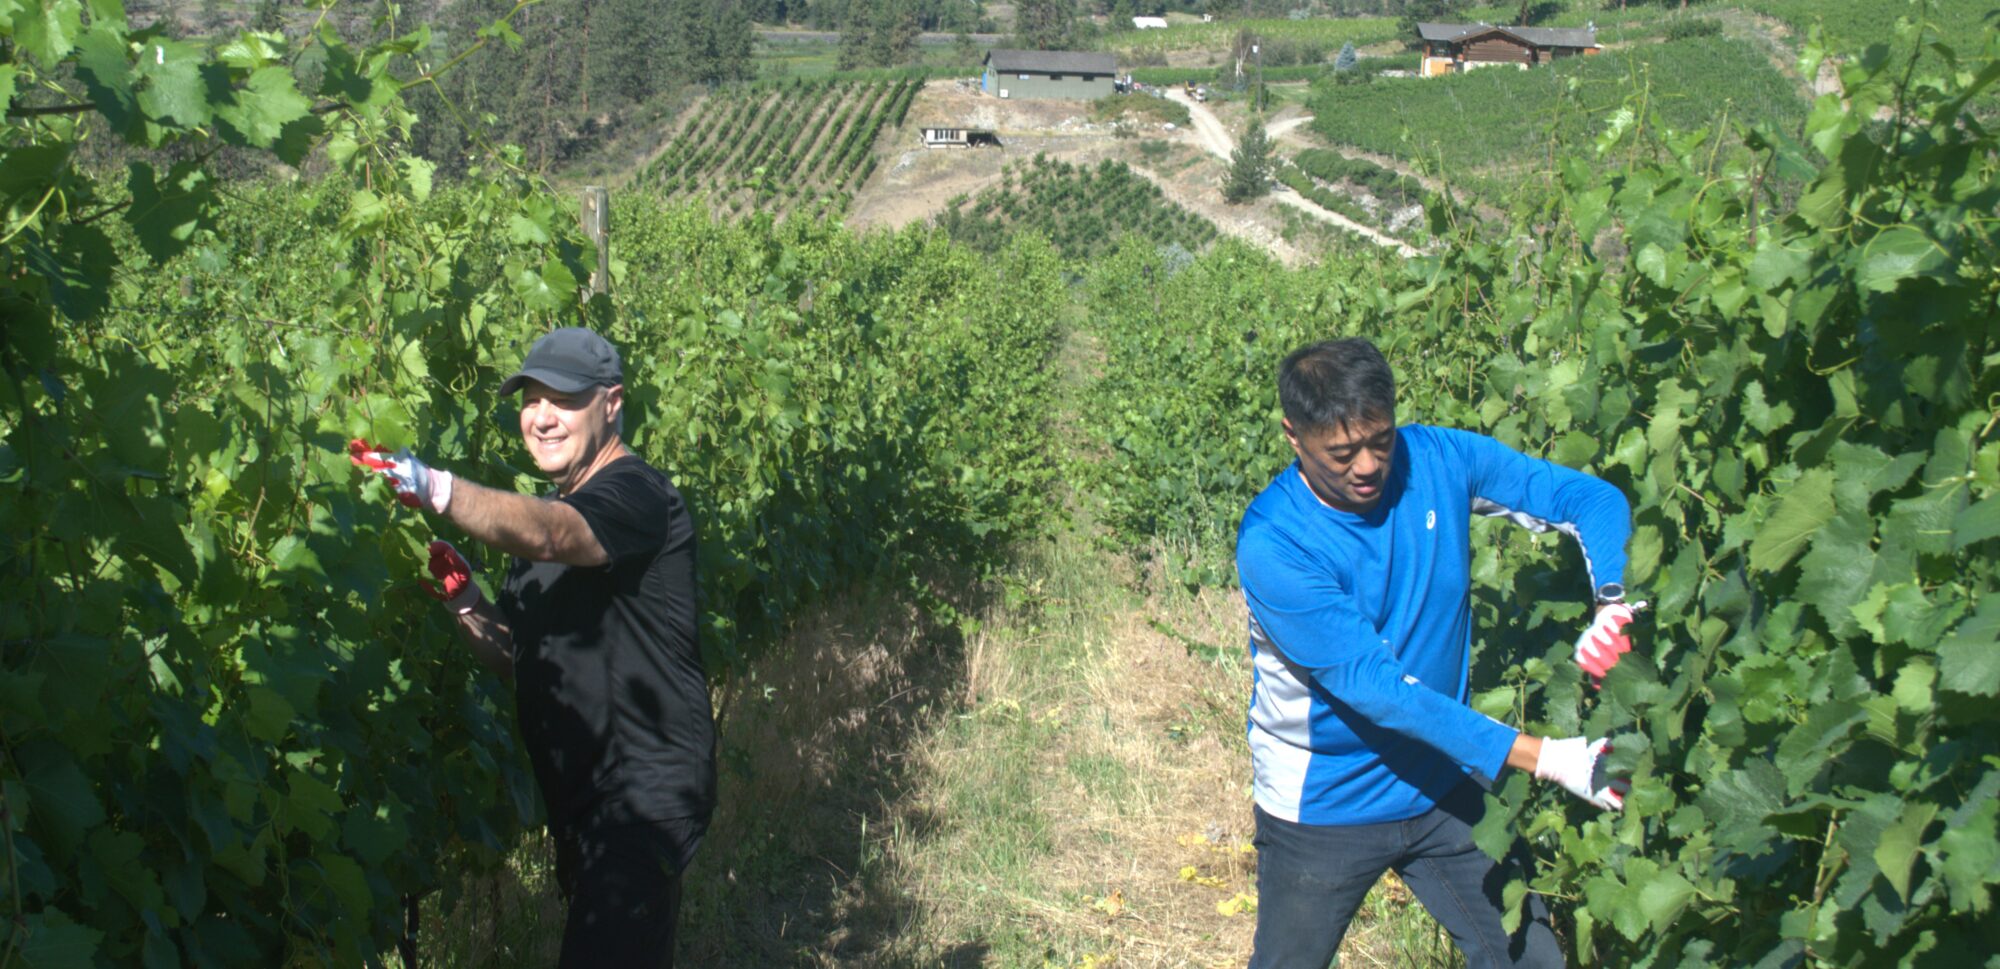 Phil and Mario in vineyard working on the vines.